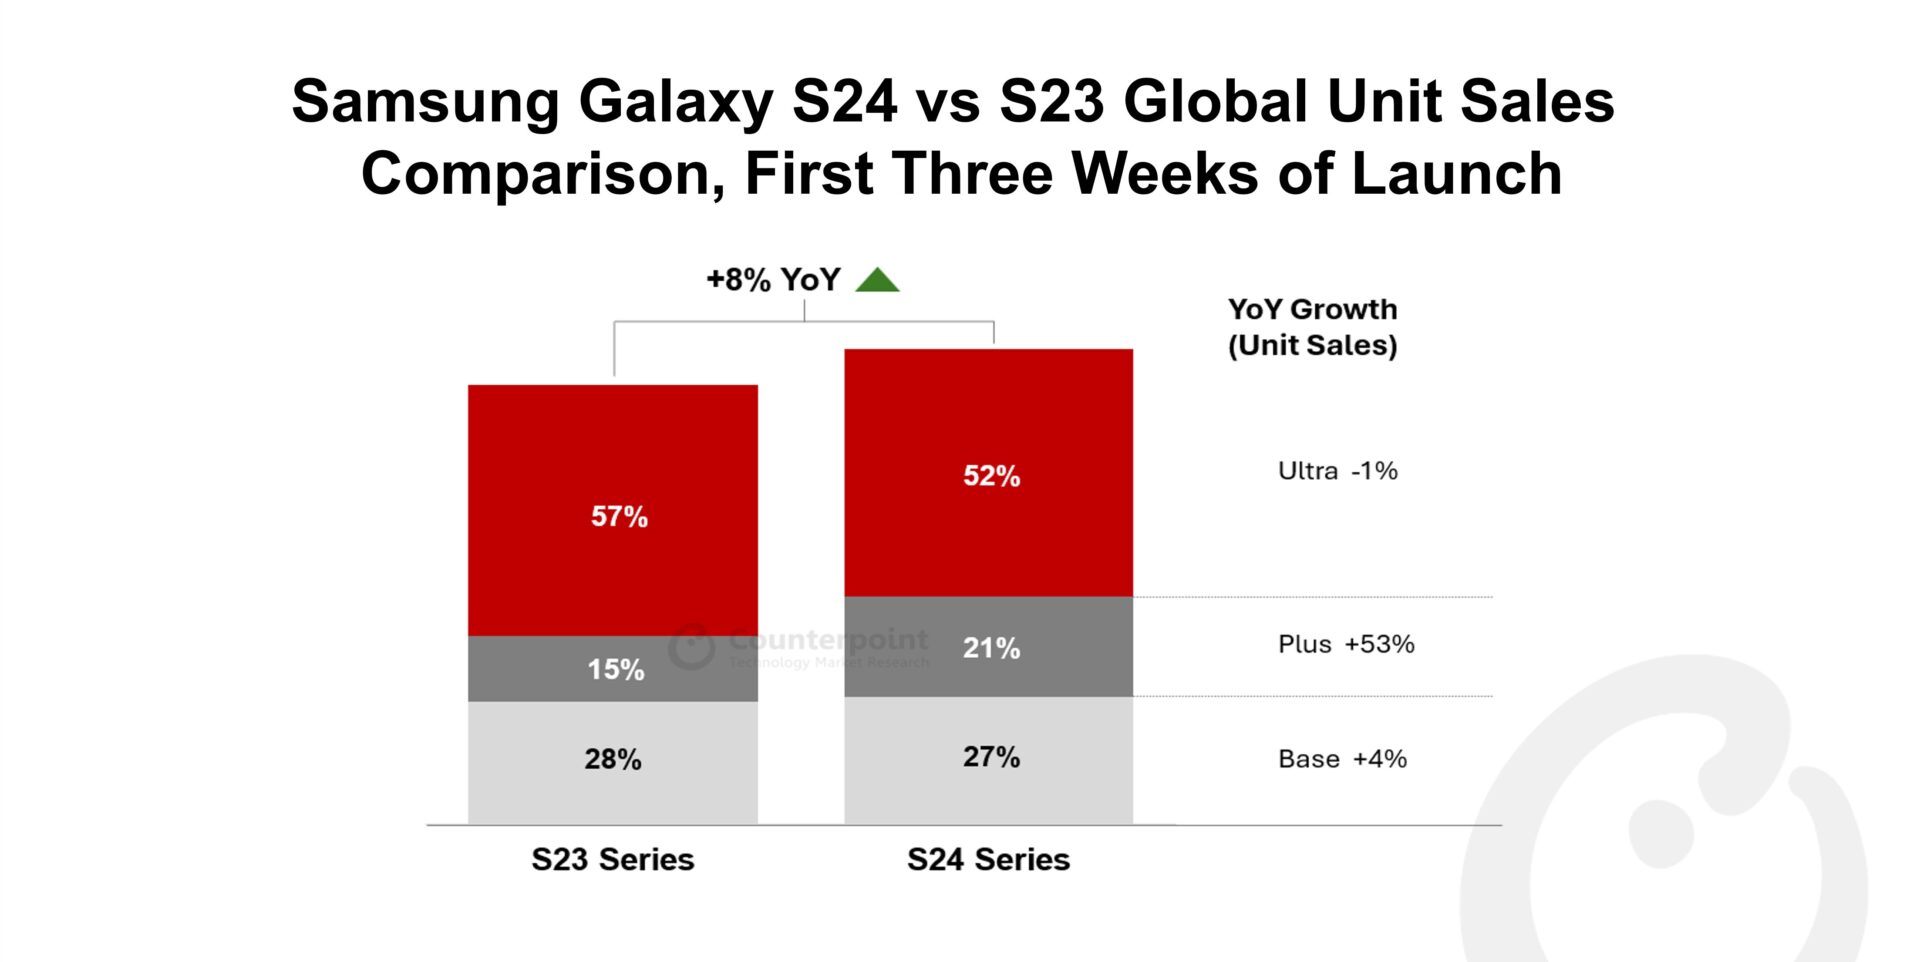 Samsung Galaxy S24 vs S23 Global Unit Sales Comparison, First Three Weeks of Launch